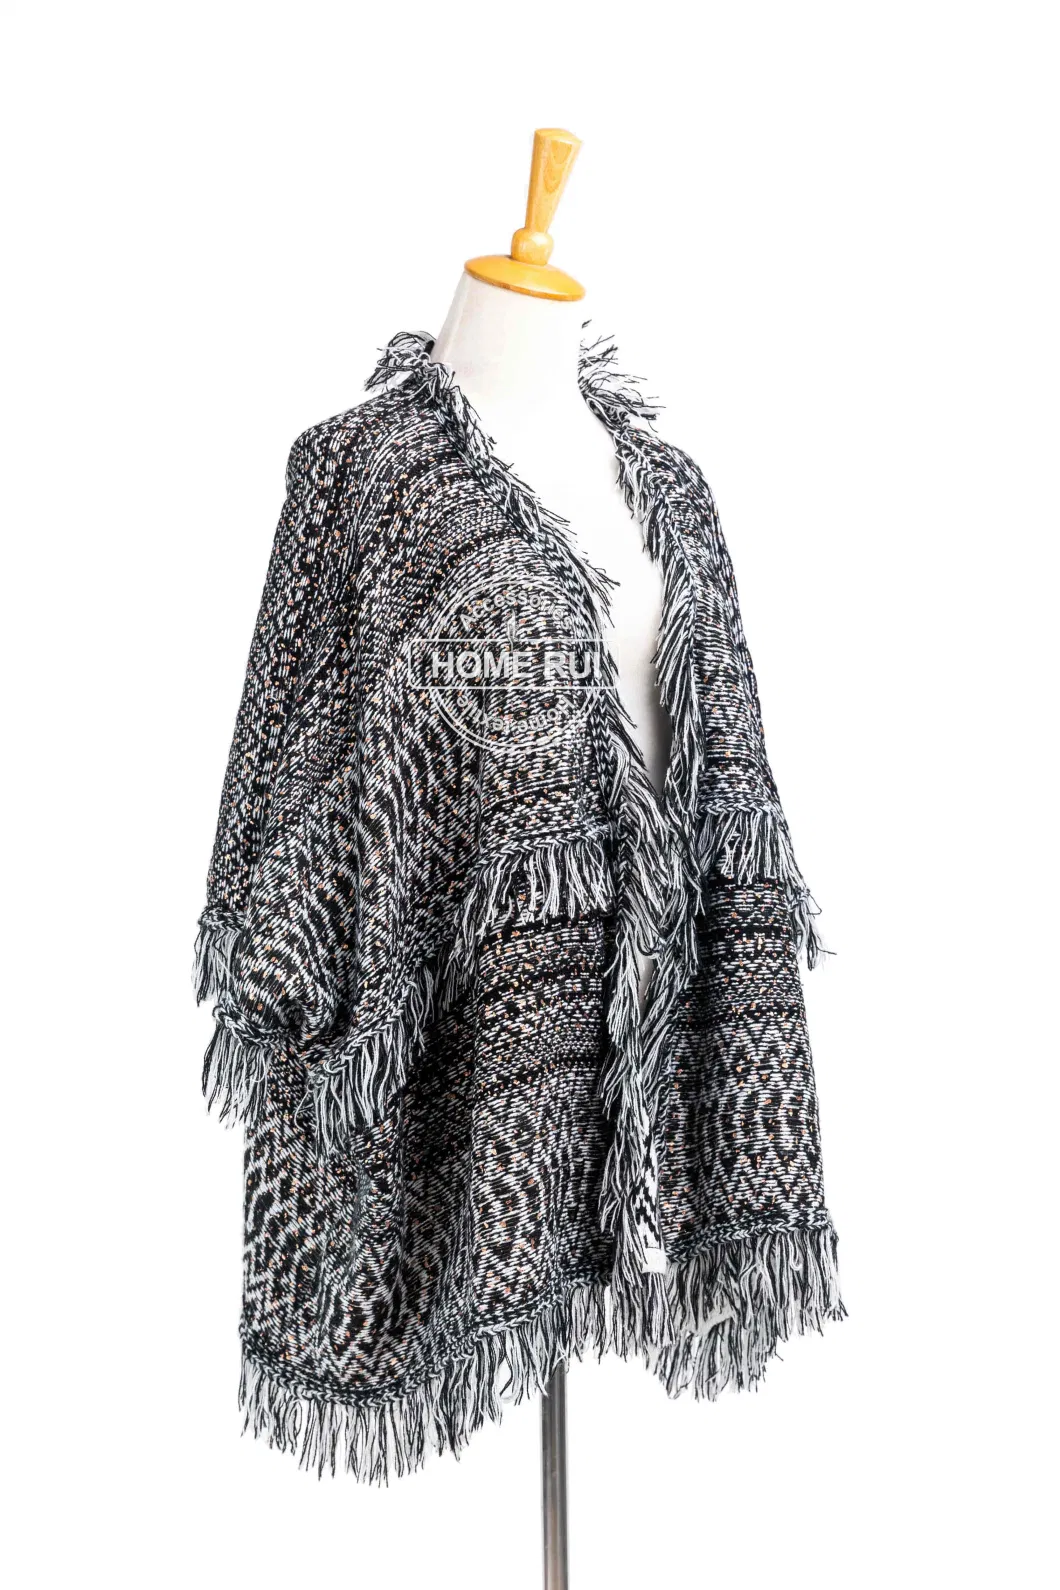 Home Rui Maufacturer Outerwear Spring Autumn Woman Warmth Apparel Accessory Fashion Rhombus Knitted Black Mixed Oversize Wraps Fringe Shawl Cardigan Cloak Cape